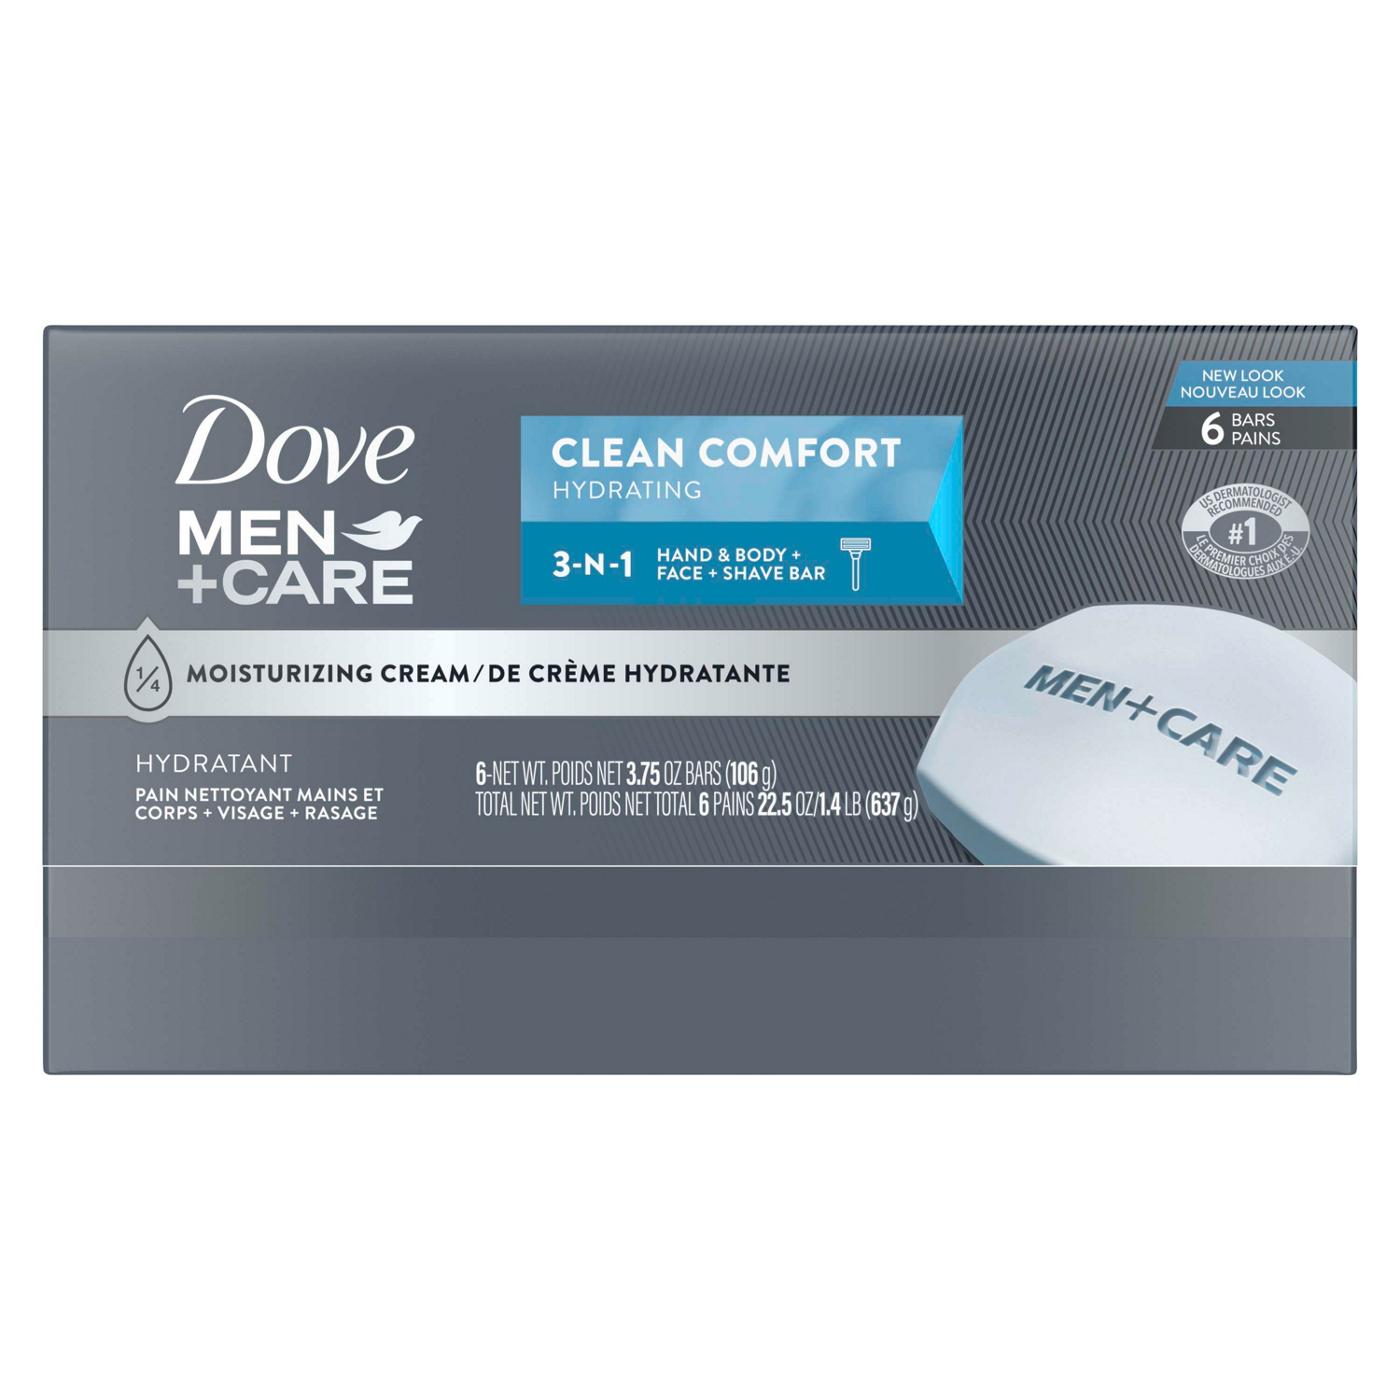 Dove Men+Care Body Soap and Face Bar Clean Comfort; image 3 of 3